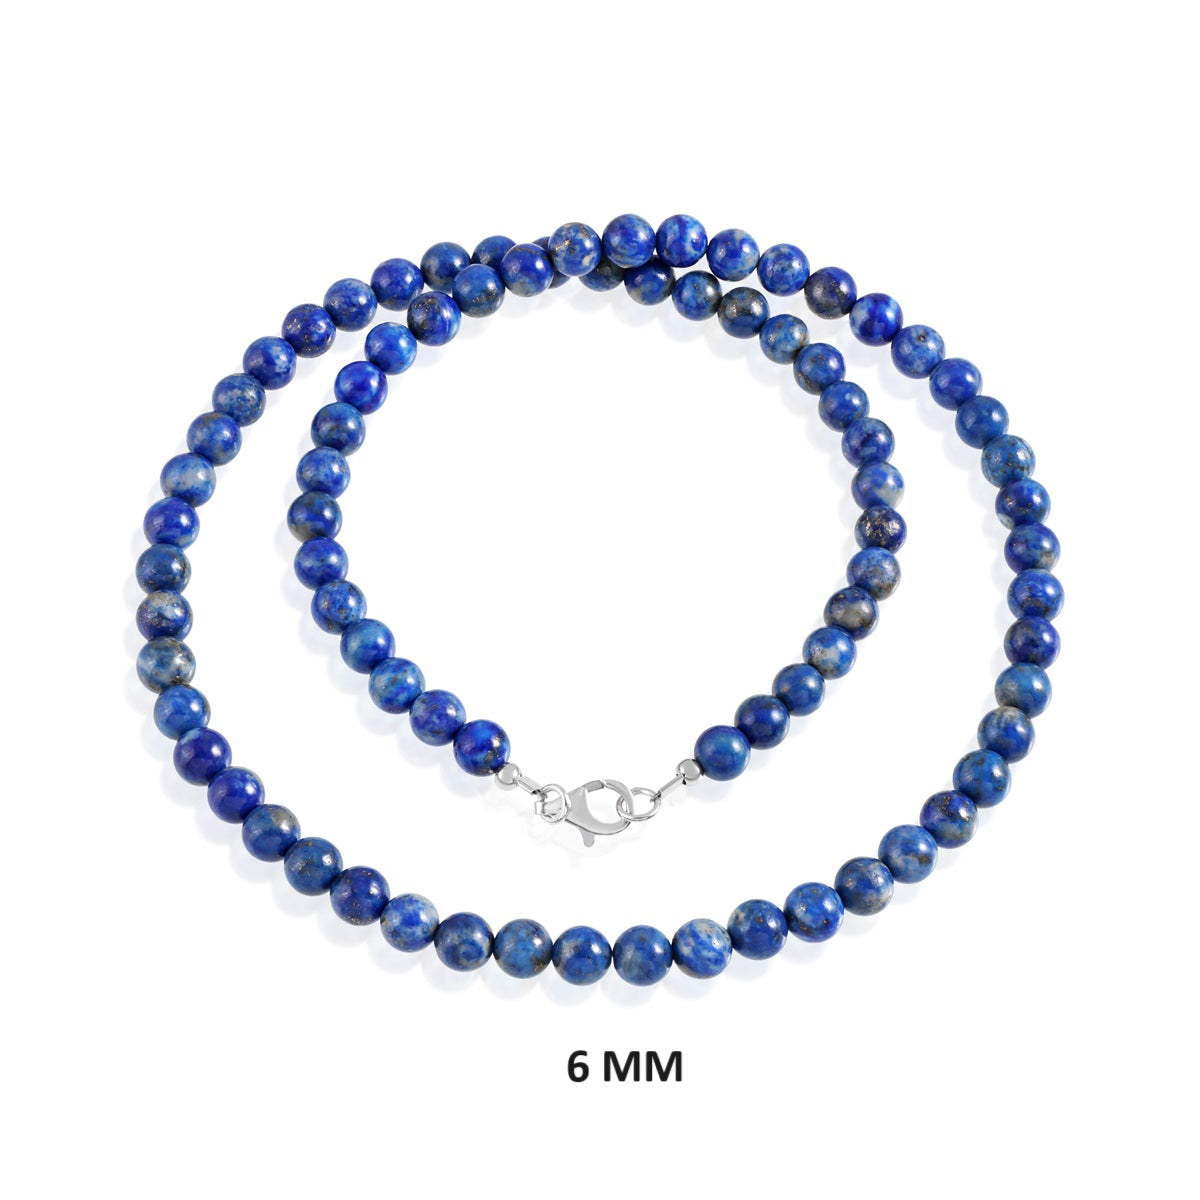 Lapis Lazuli Beads Silver Necklace: Elegance and Wisdom Combined